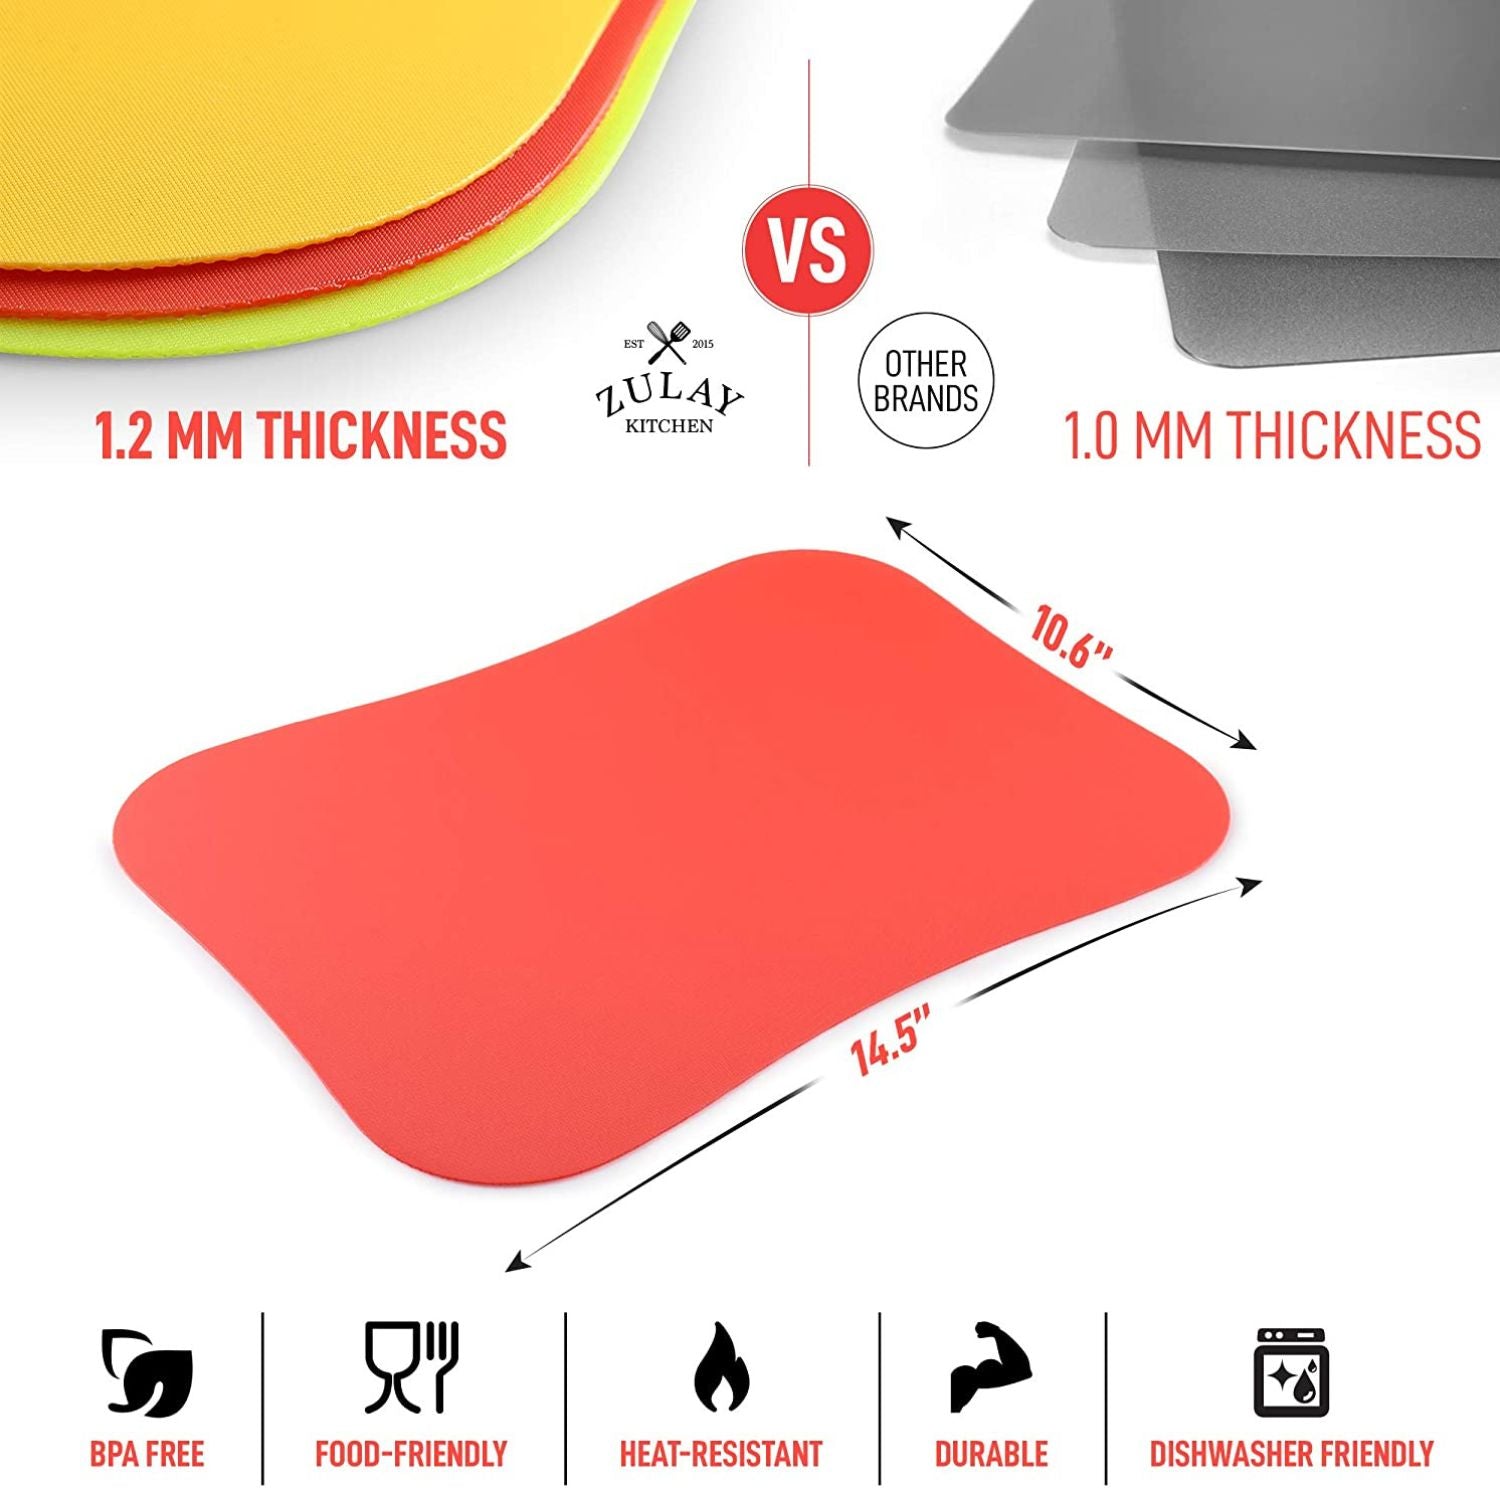 Hariumiu Kitchen Extra Thin Flexible Cutting Boards for Kitchen - Cutting Mats for Cooking, Colored Cutting Mat Set with Easy-Grip Handles | Non Slip